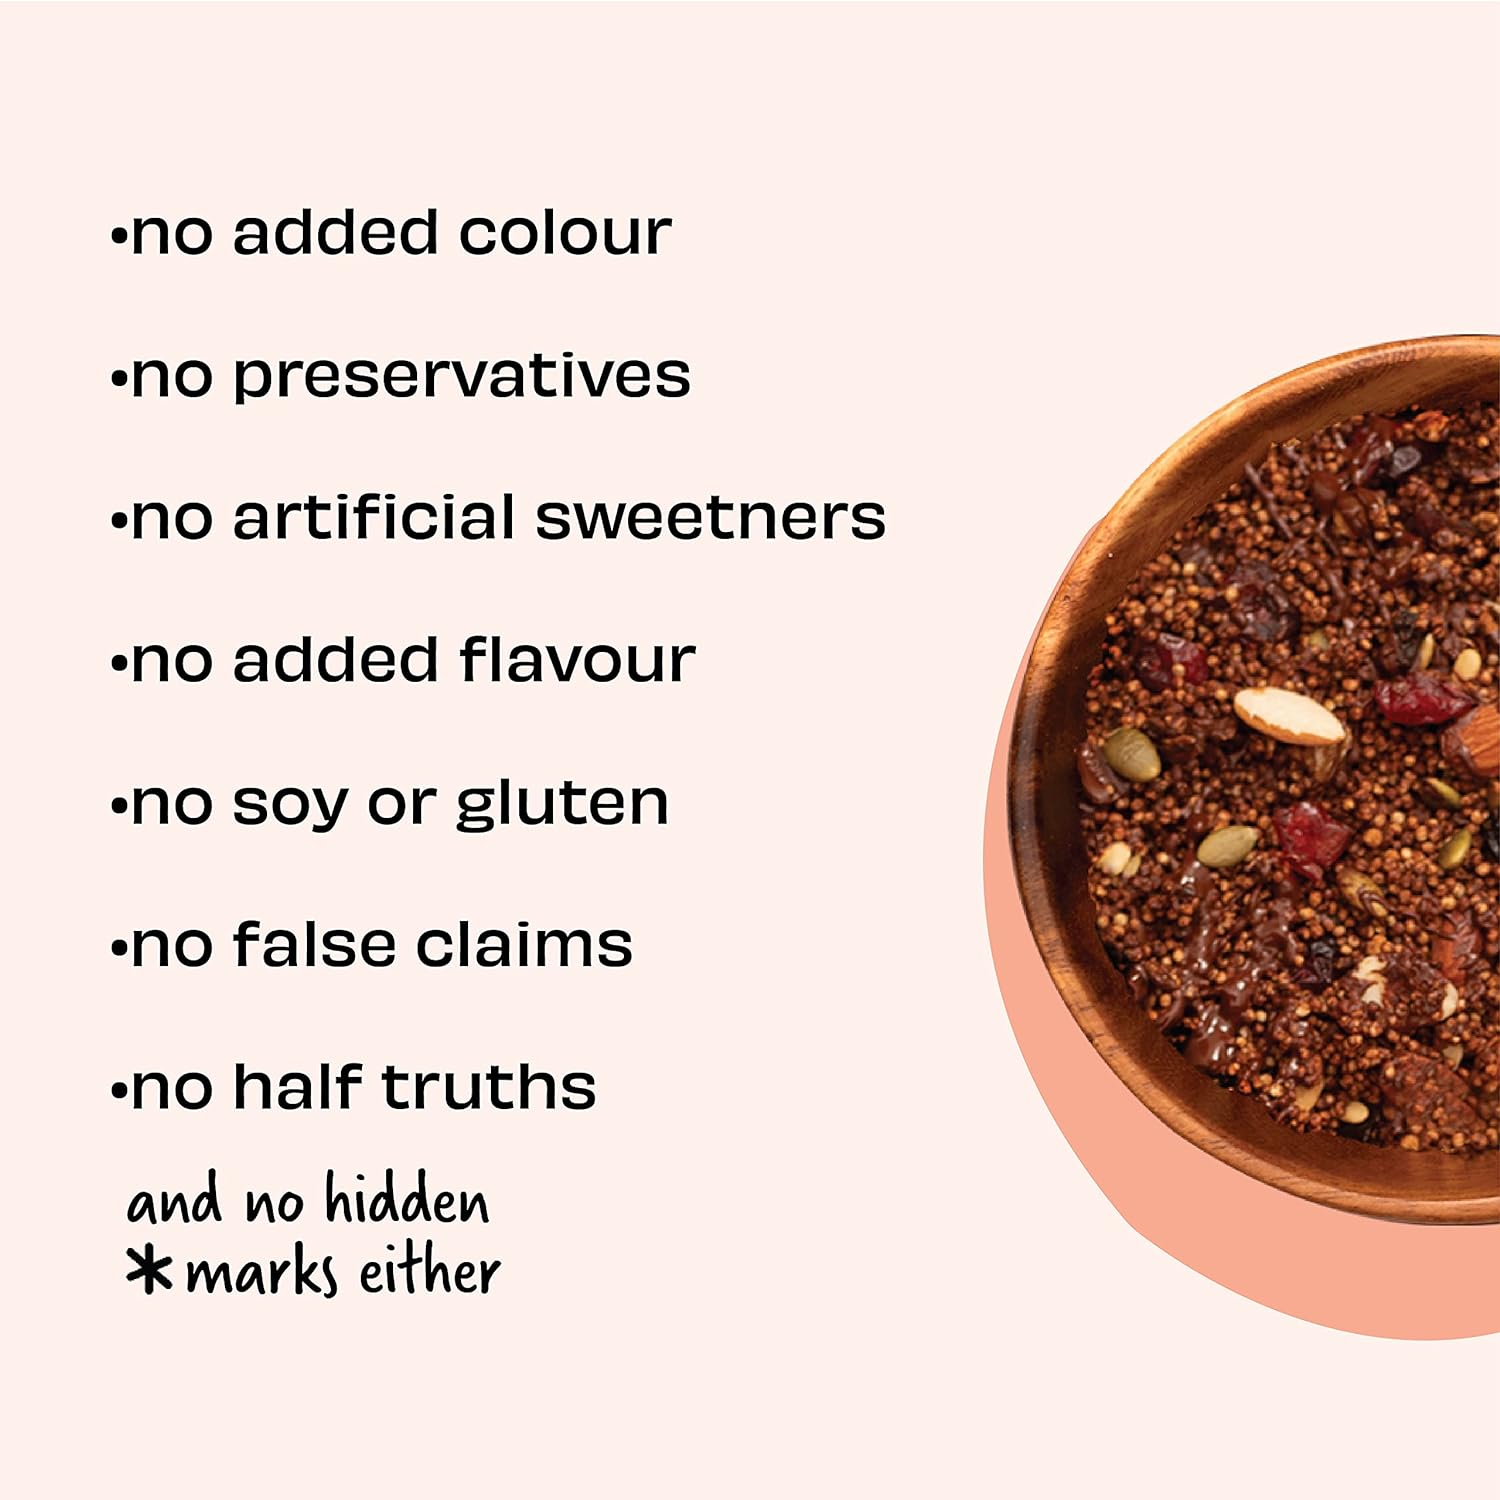 The Whole Truth - Breakfast Muesli | Quinoa Choco Crunch Muesli | 320grams | Vegan | Dairy-free | No Artificial Sweeteners | No Added Flavours | No Gluten or Soy | Nutritious Snacks